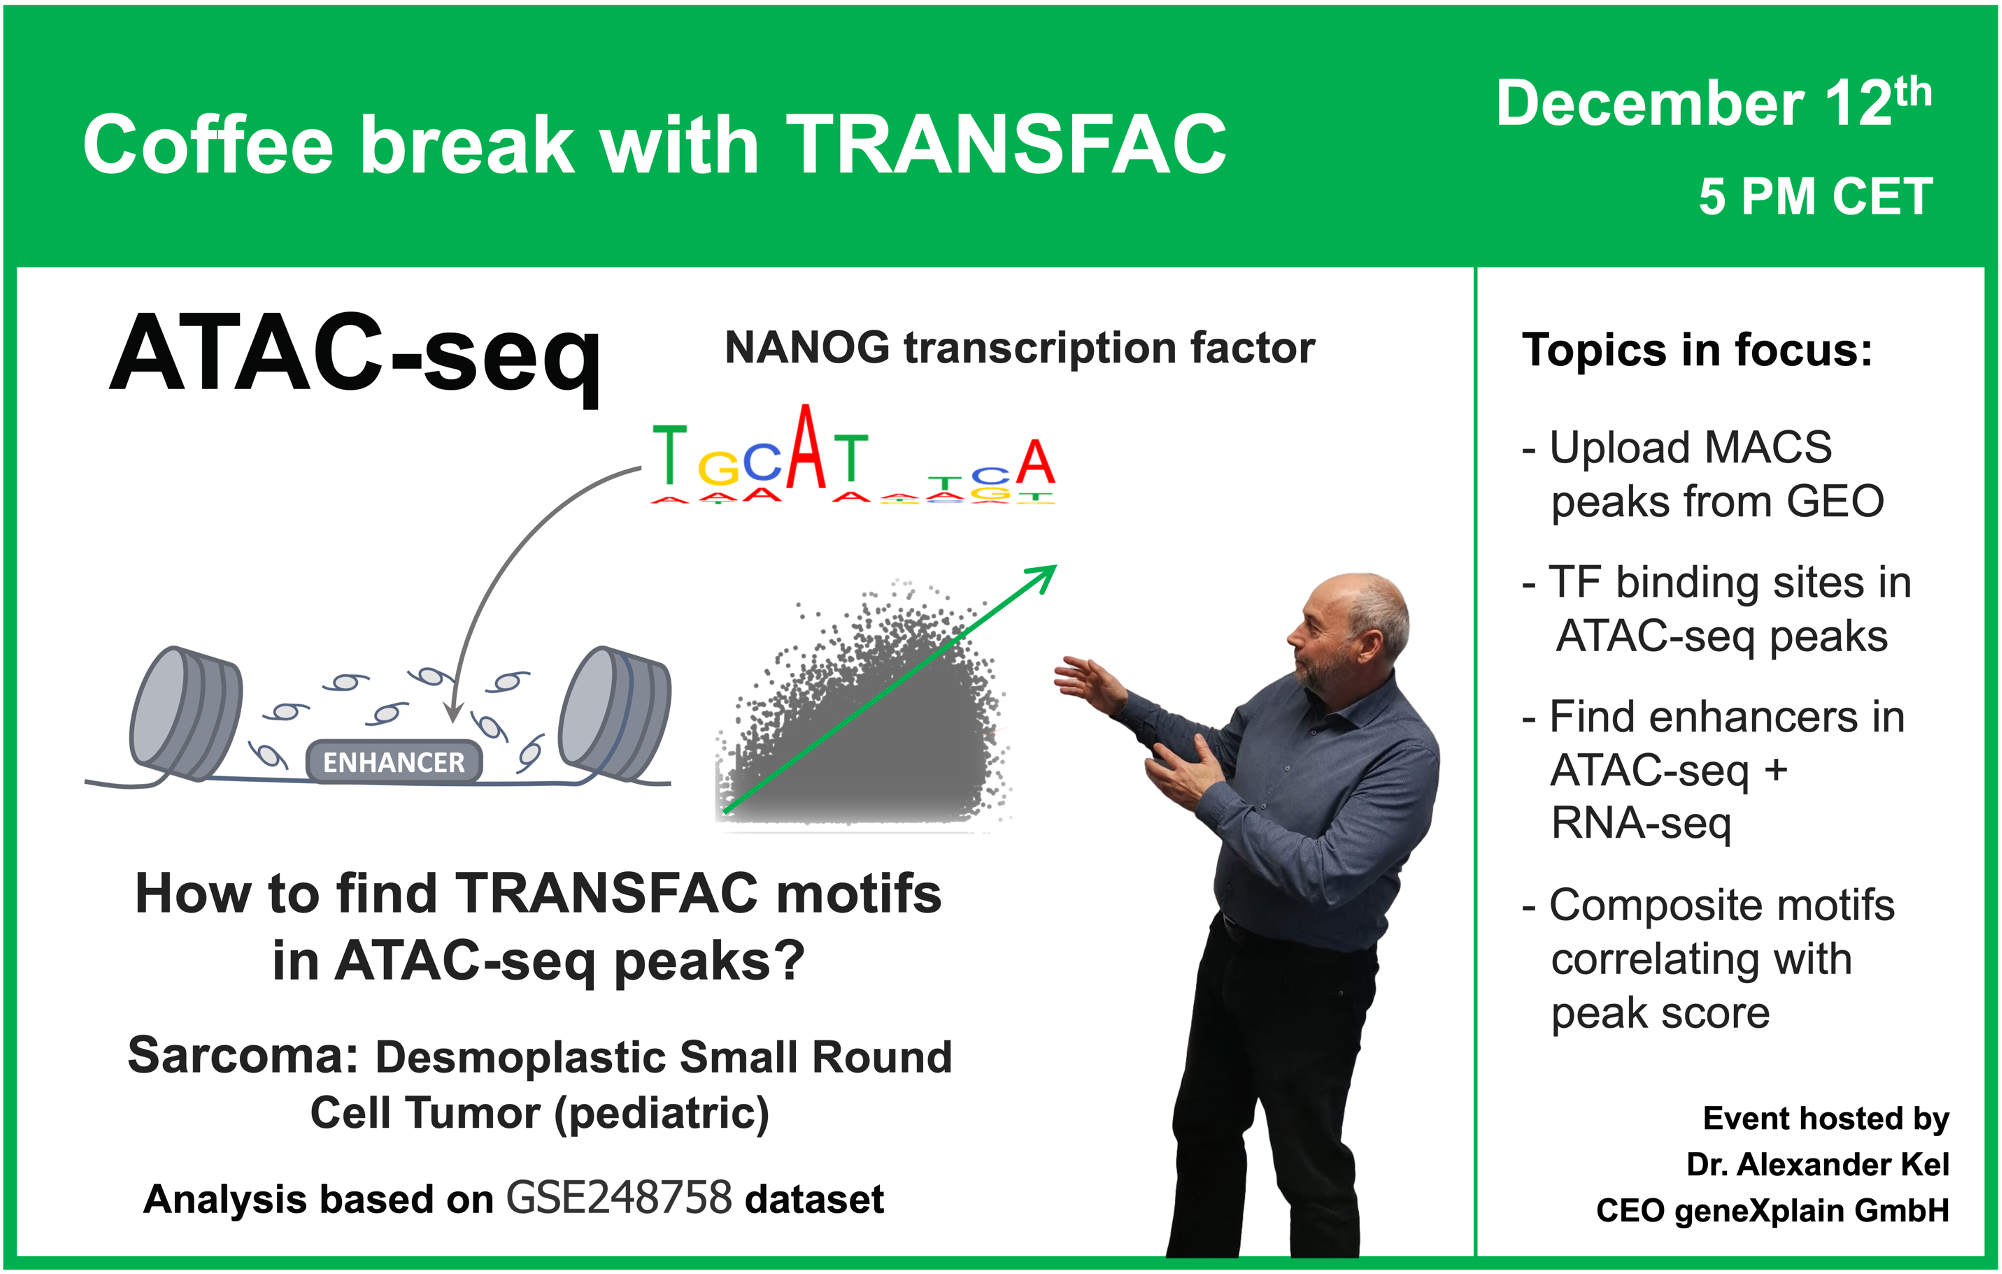 Coffee break with TRANSFAC on December 12th at 5 PM CET